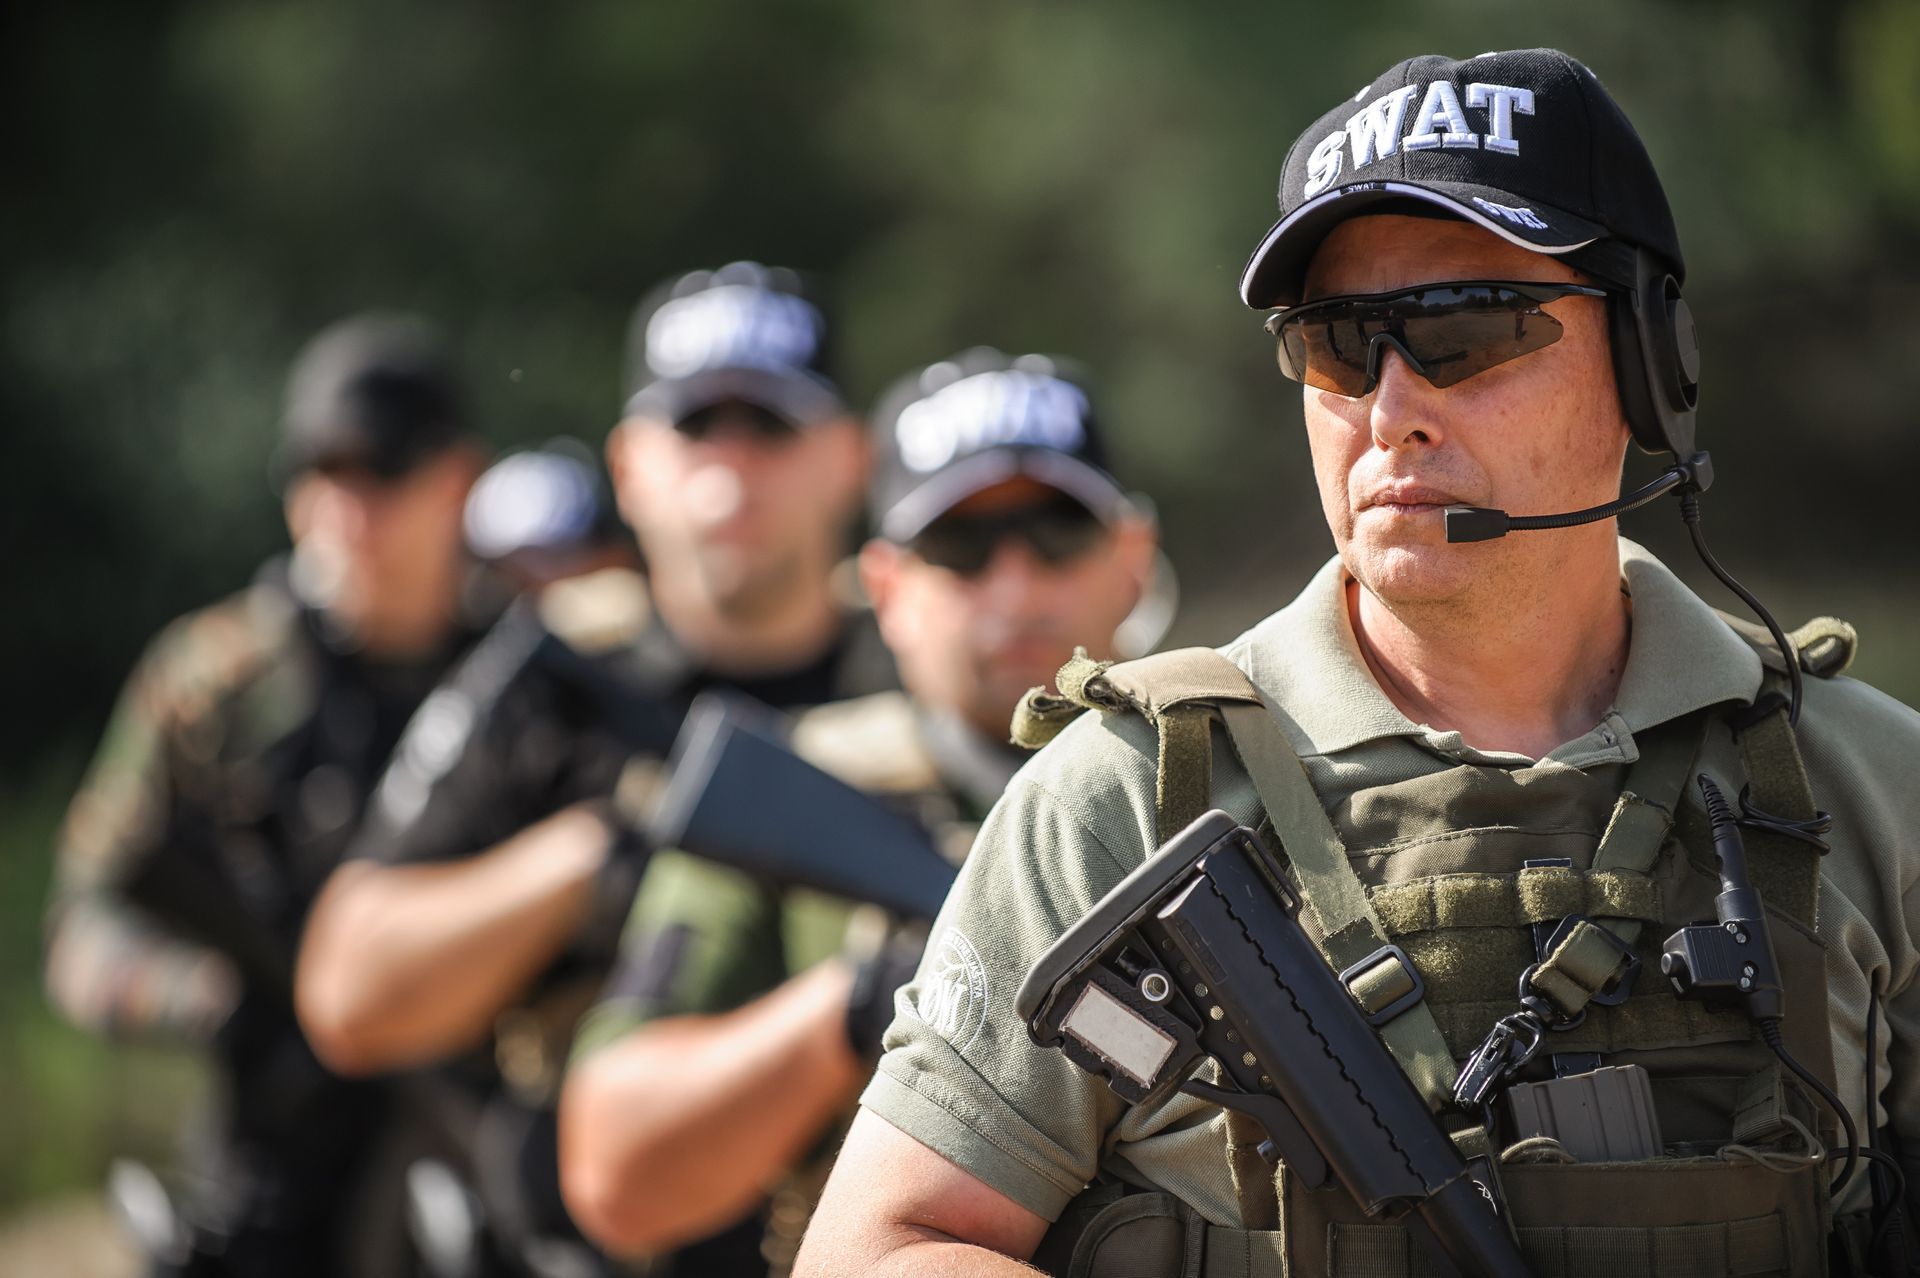 A man in a swat hat is standing in front of a group of soldiers.